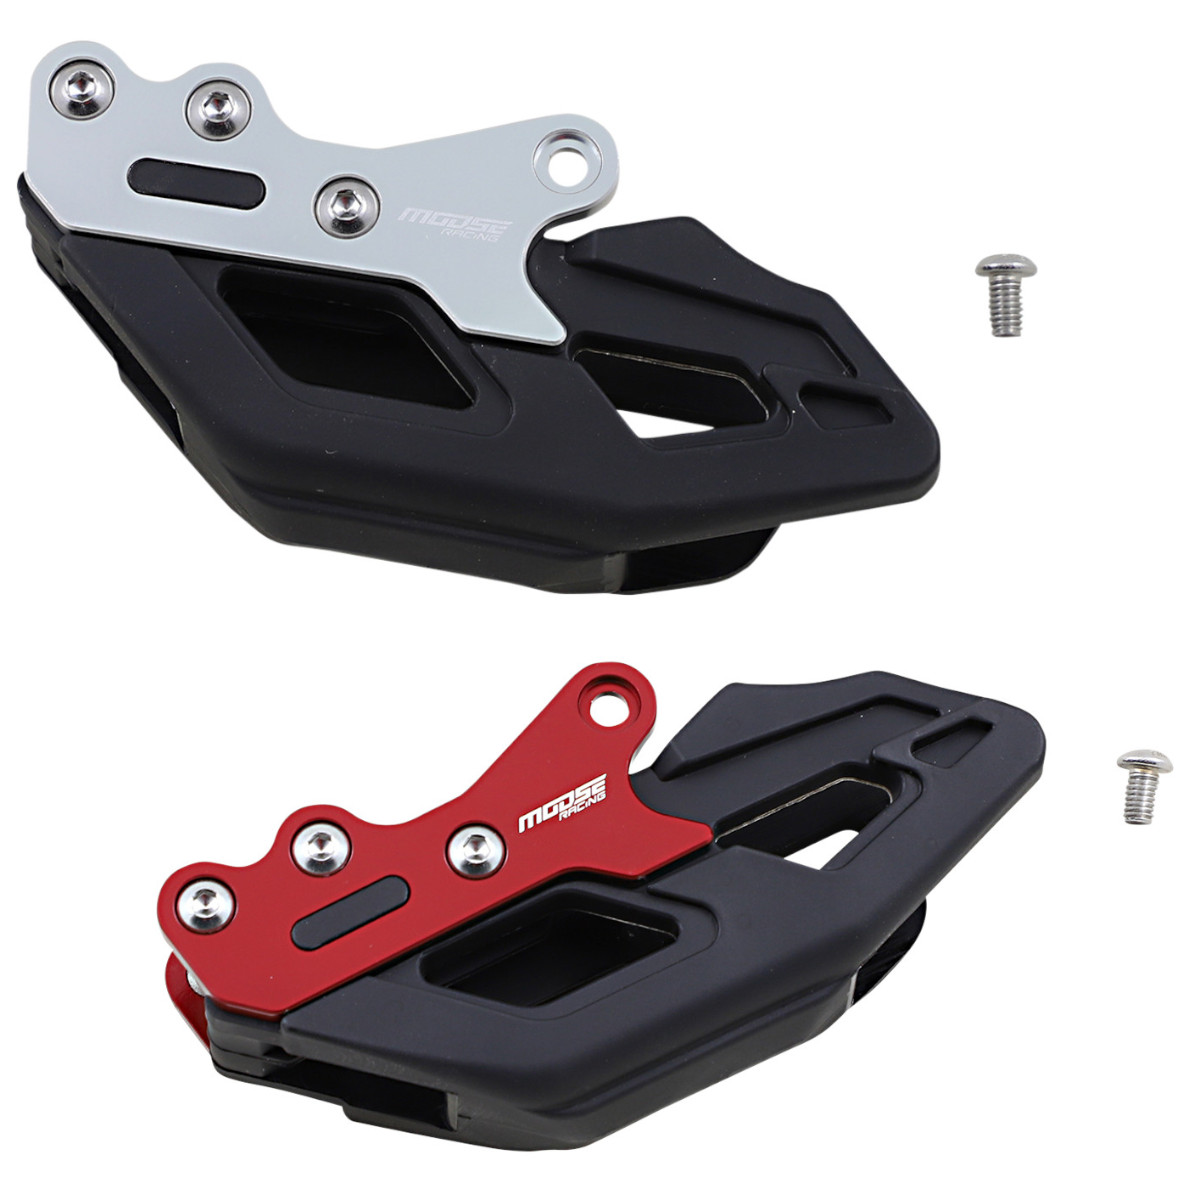 Guide Chaine Moose Racing pour Honda CRF 250 R (07-20)